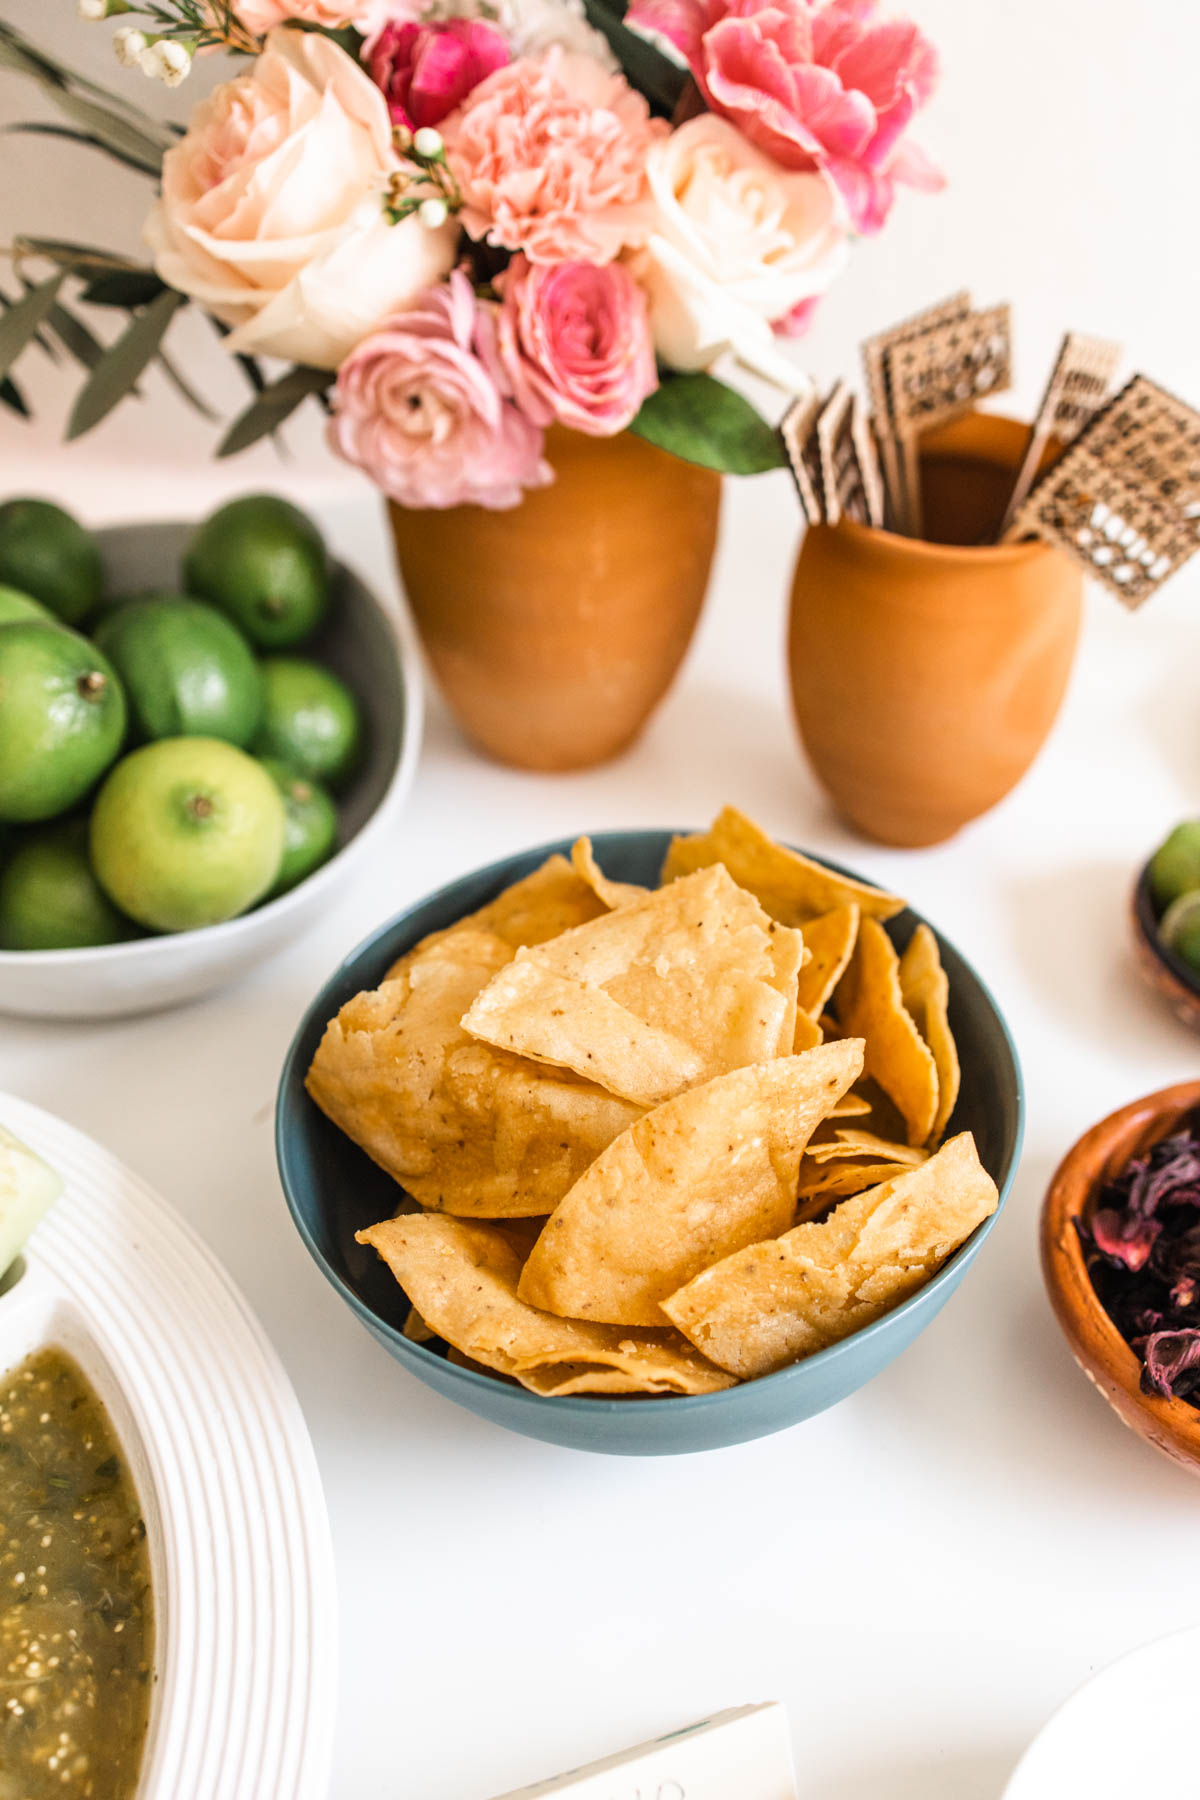 Tortilla chips in a small bowl on a party table next to some fresh flowers and limes.